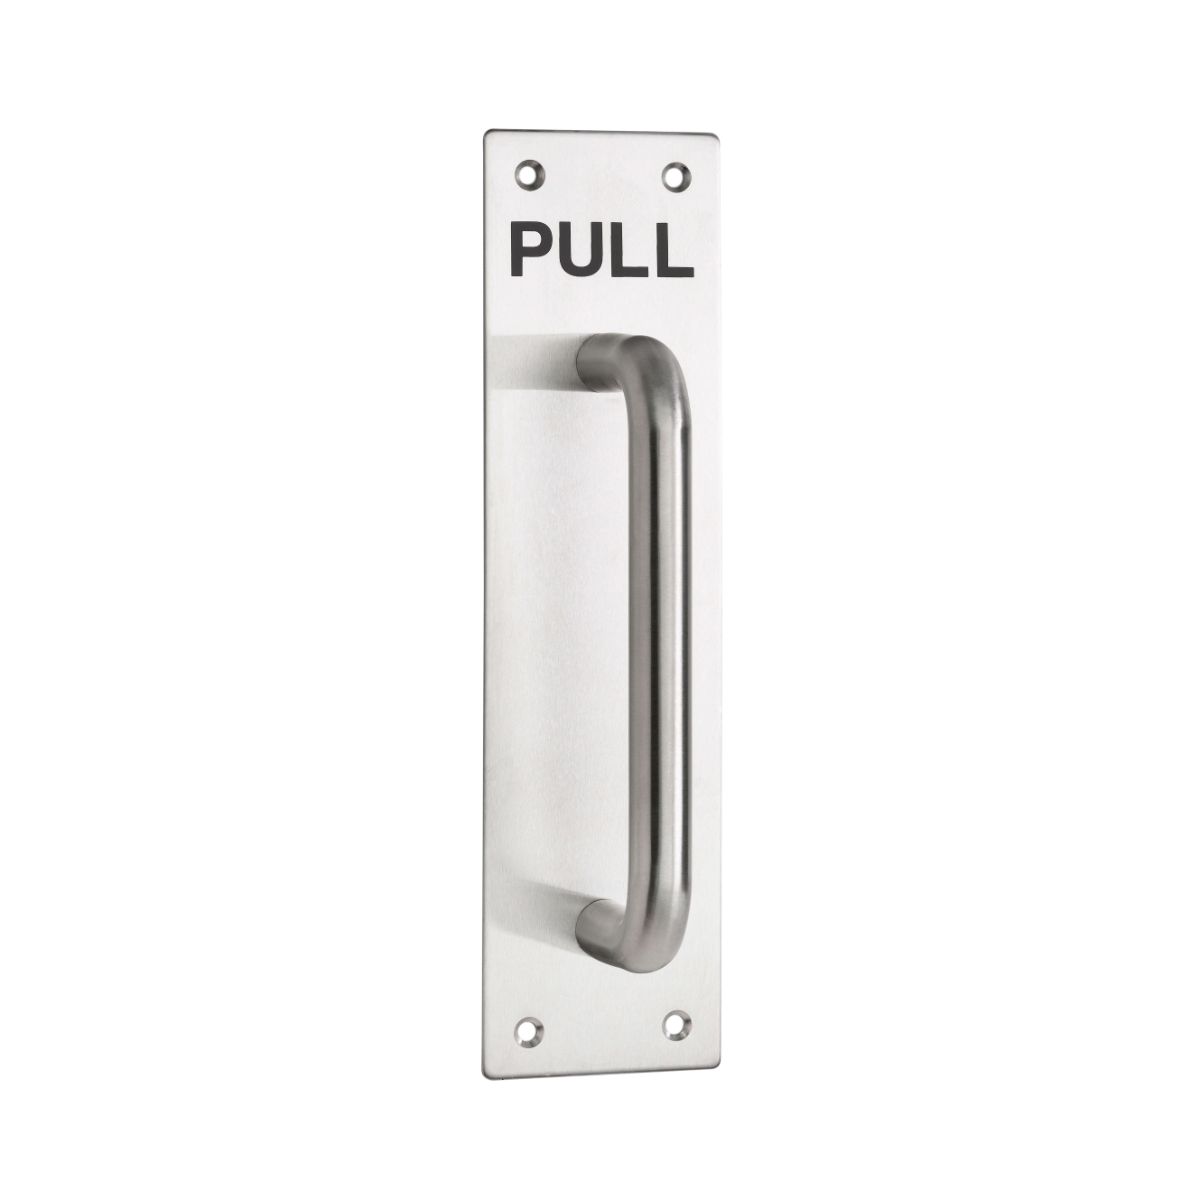 150 x 16 D Pull on 250 x 65 x 2mm Plate Engraved "PULL" - Satin Stainless Steel